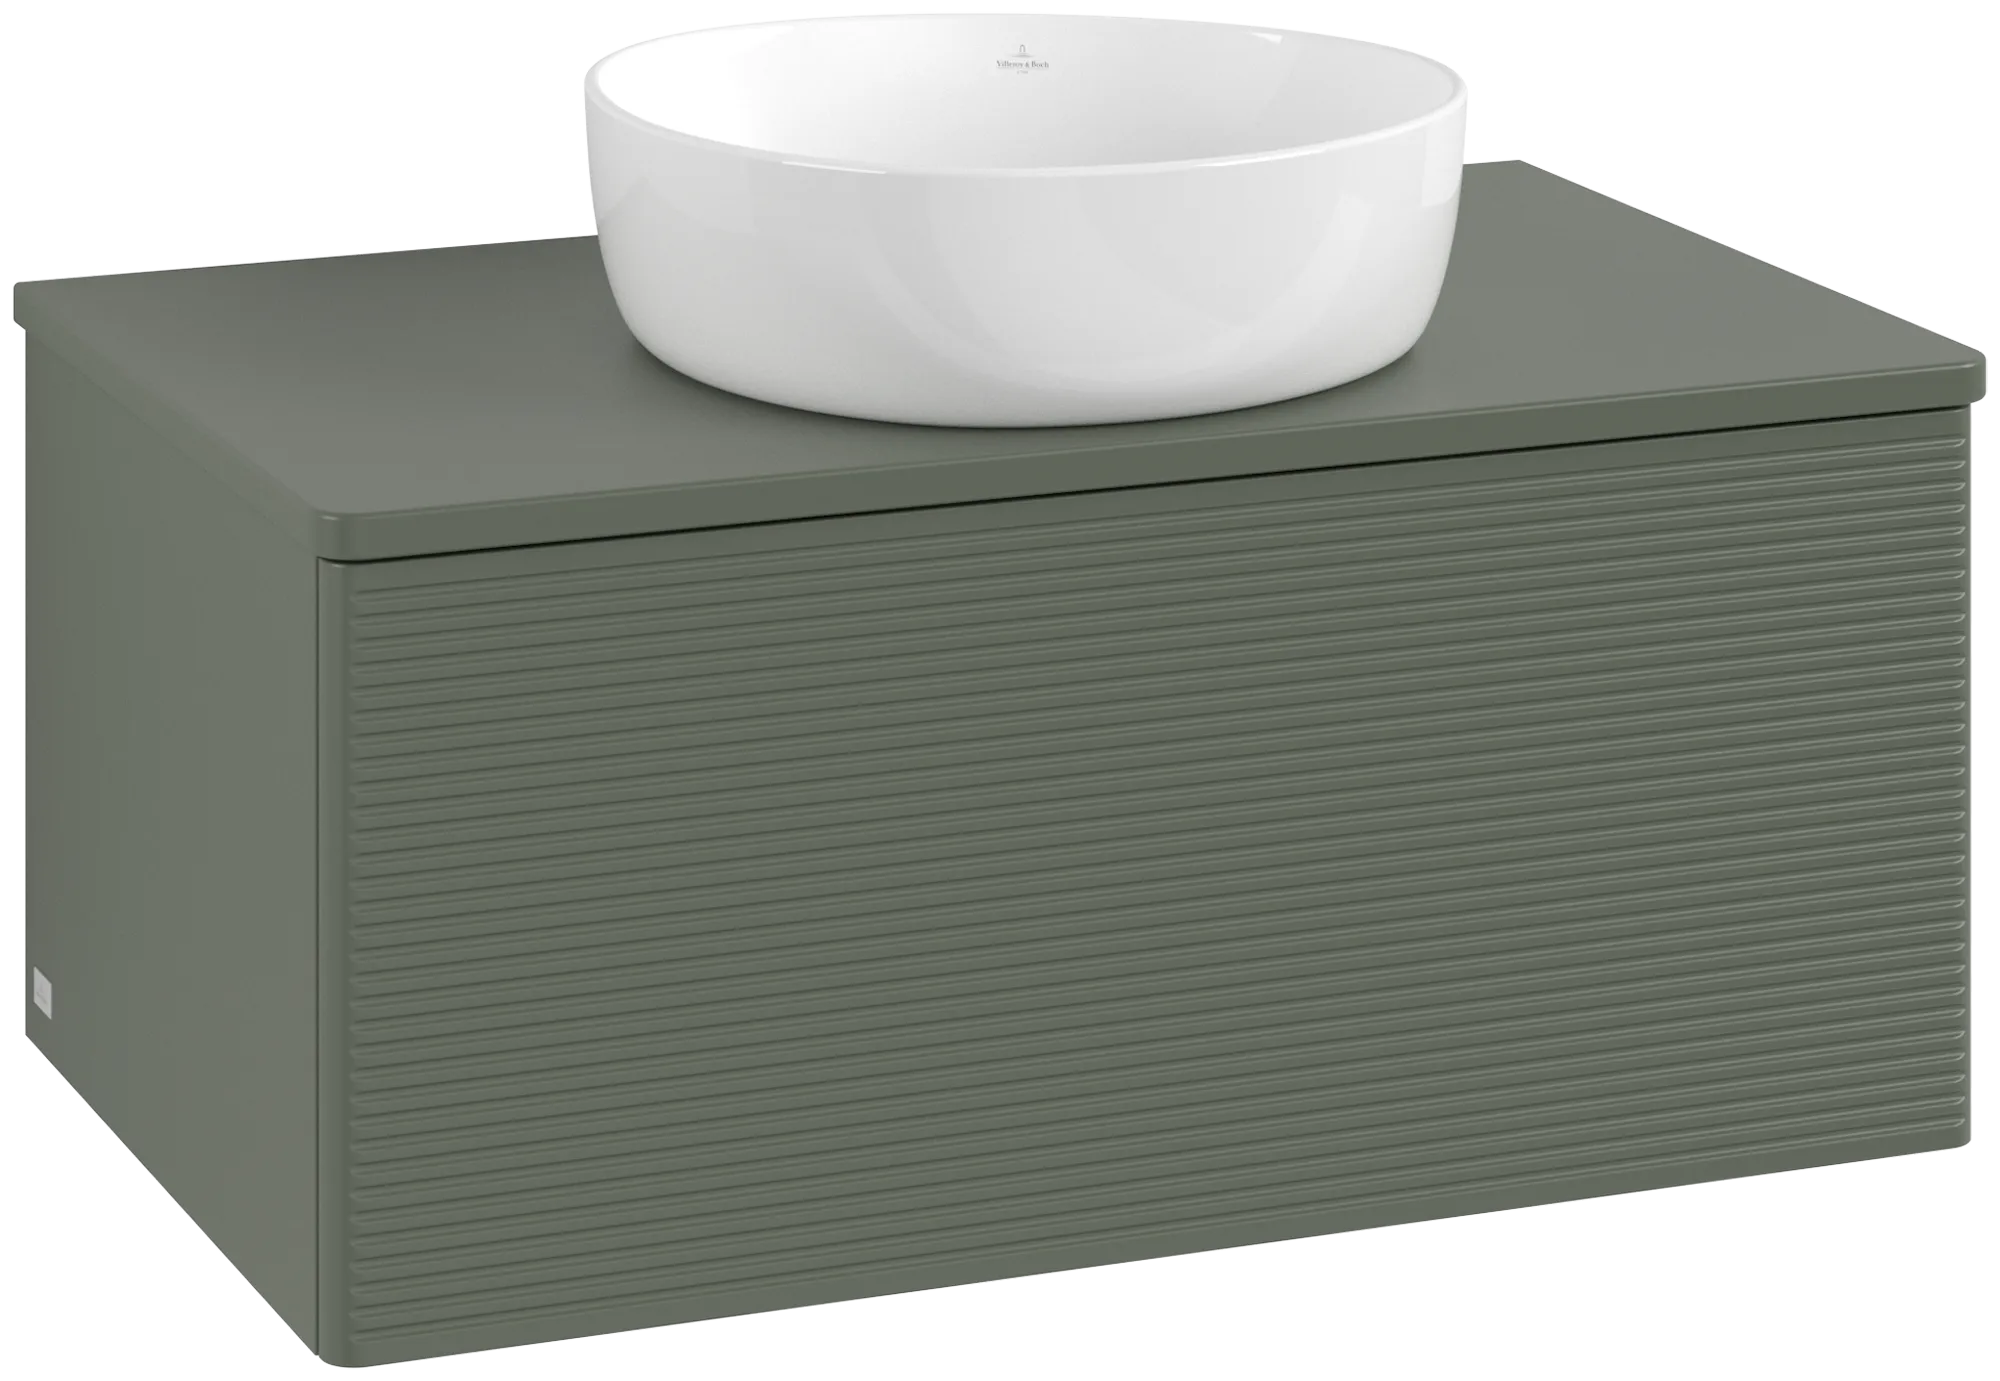 Picture of VILLEROY BOCH Antao Vanity unit, with lighting, 1 pull-out compartment, 800 x 360 x 500 mm, Front with grain texture, Leaf Green Matt Lacquer / Leaf Green Matt Lacquer #L30150HL